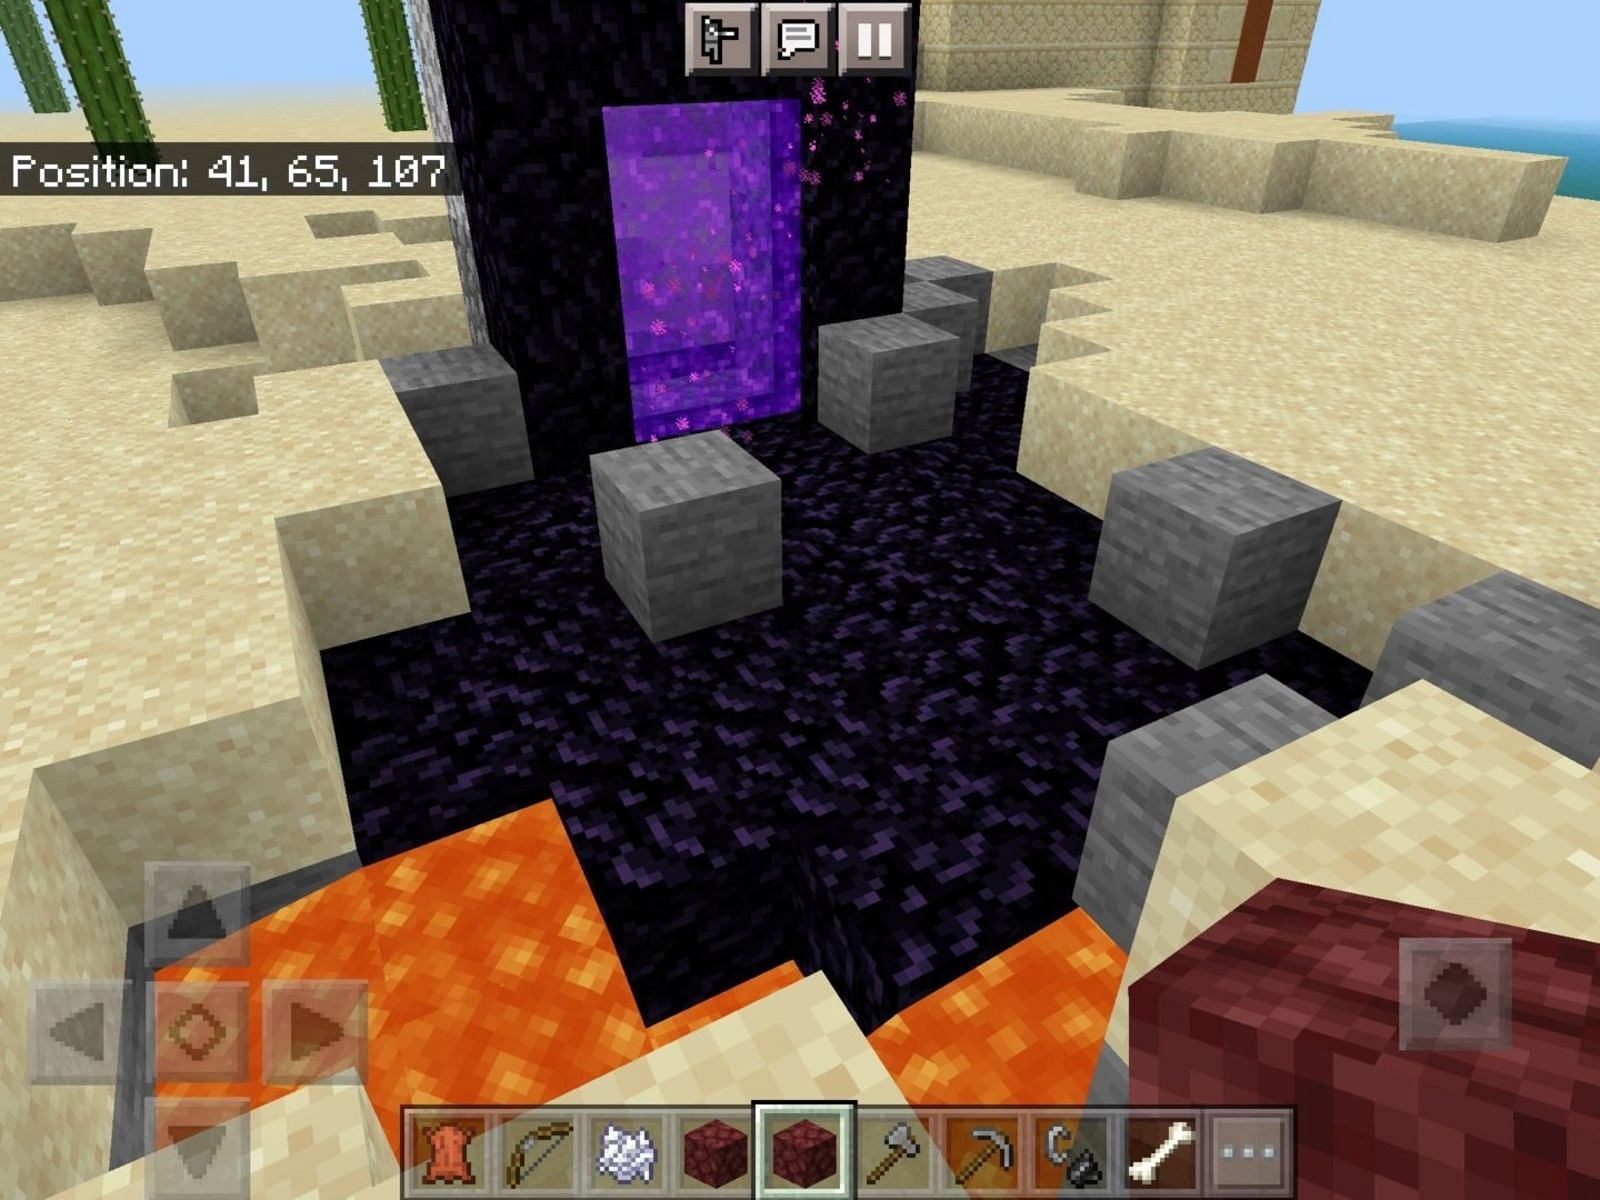 Players can enter the Nether in moments in this seed (Image via Hellooo/MinecraftSeeds)